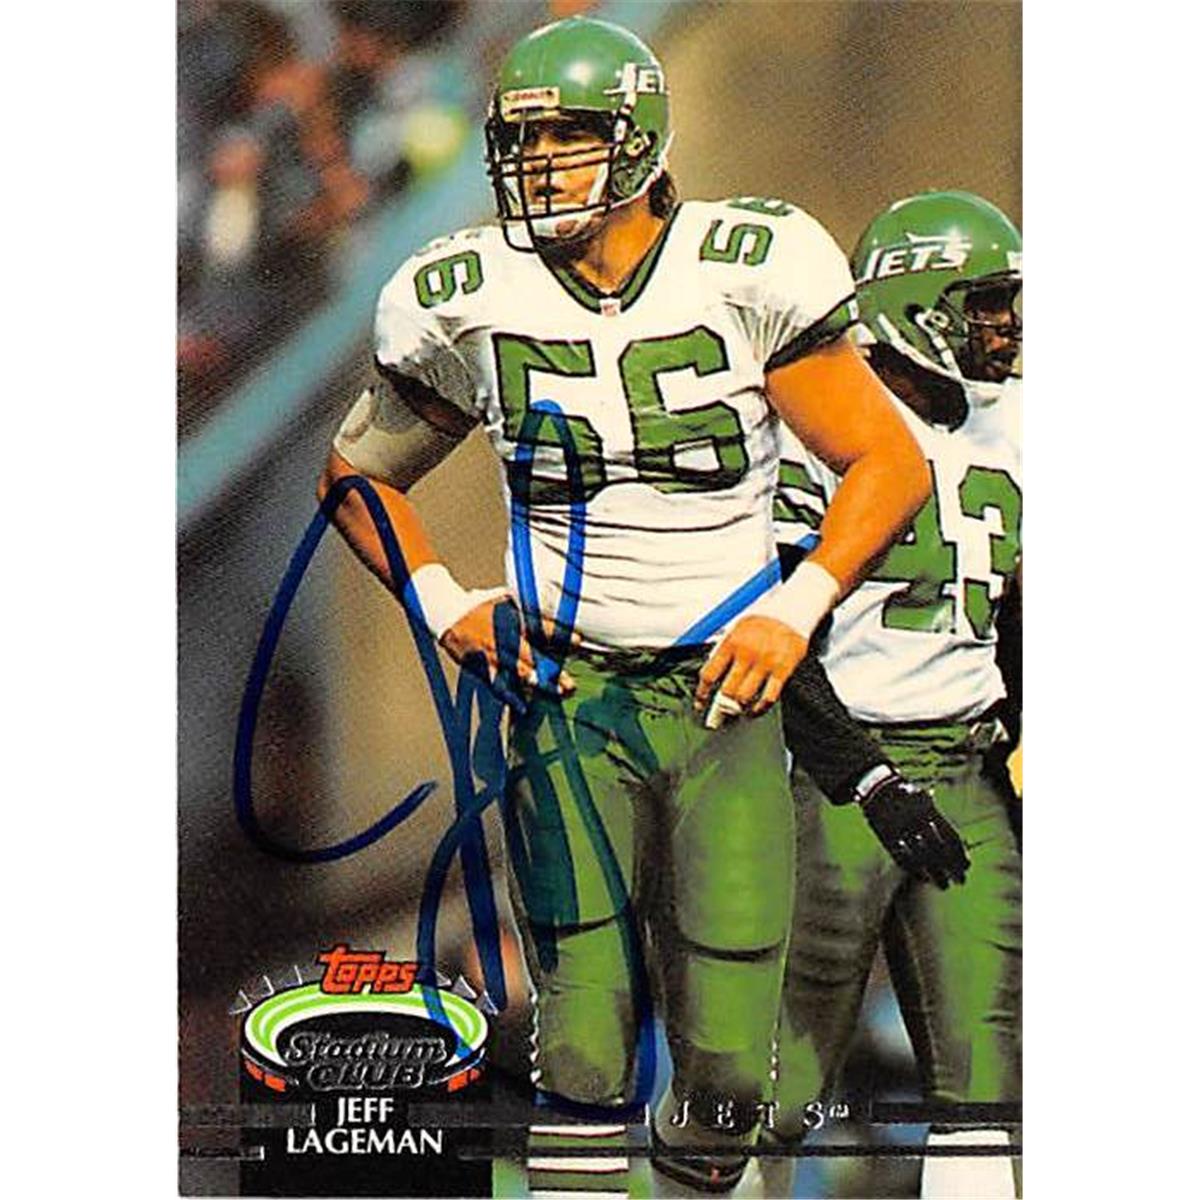 Picture of Autograph Warehouse 377248 Jeff Lageman Autographed Football Card - New York Jets 1992 Topps Stadium Club No.90